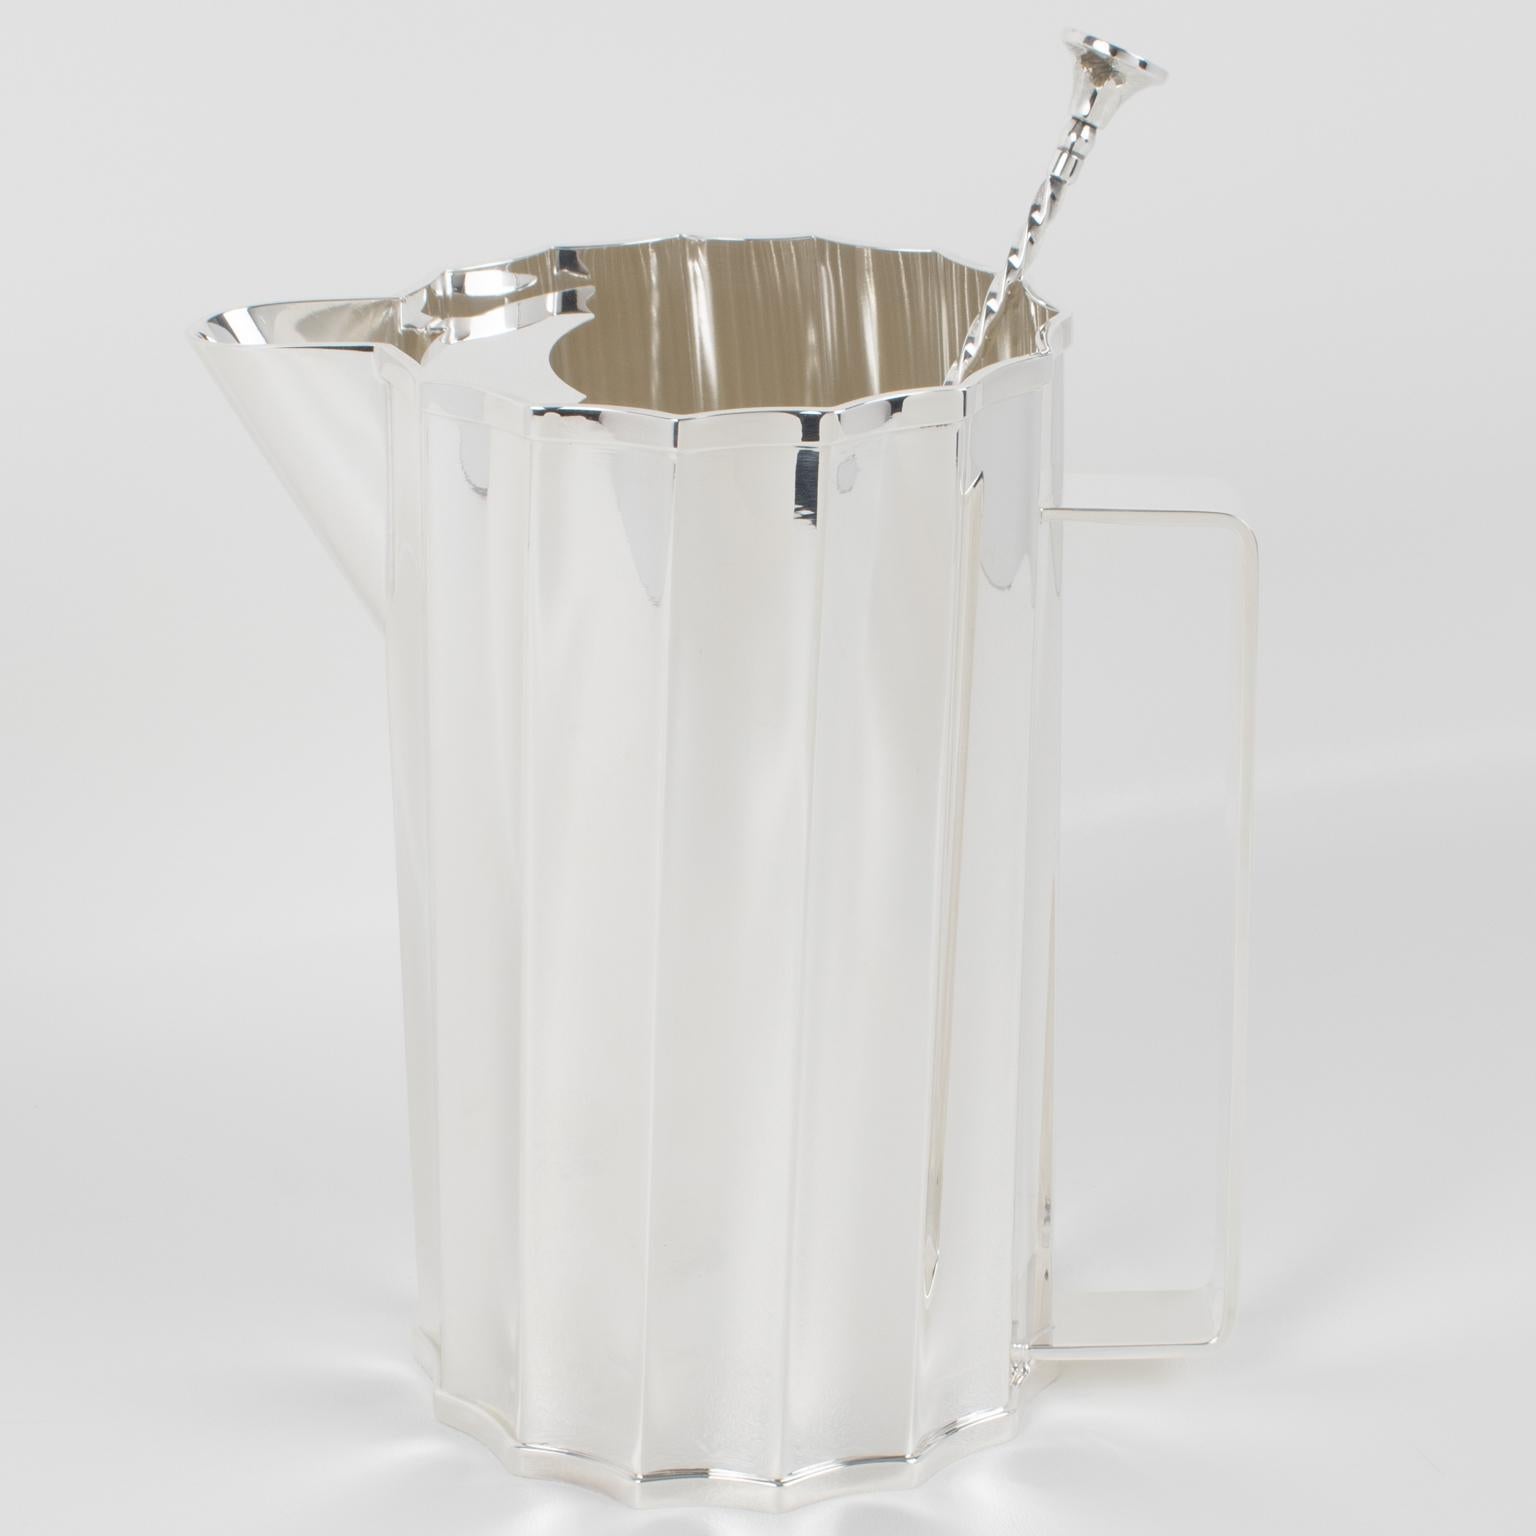 Stylish modernist Art Deco-inspired silver plate barware cocktail or Martini pitcher designed by St James, Brazil. This drink jug has a minimalist chic design, featuring a geometric twisted scalloped sunburst shape, a sturdy handle, and an ice lip.